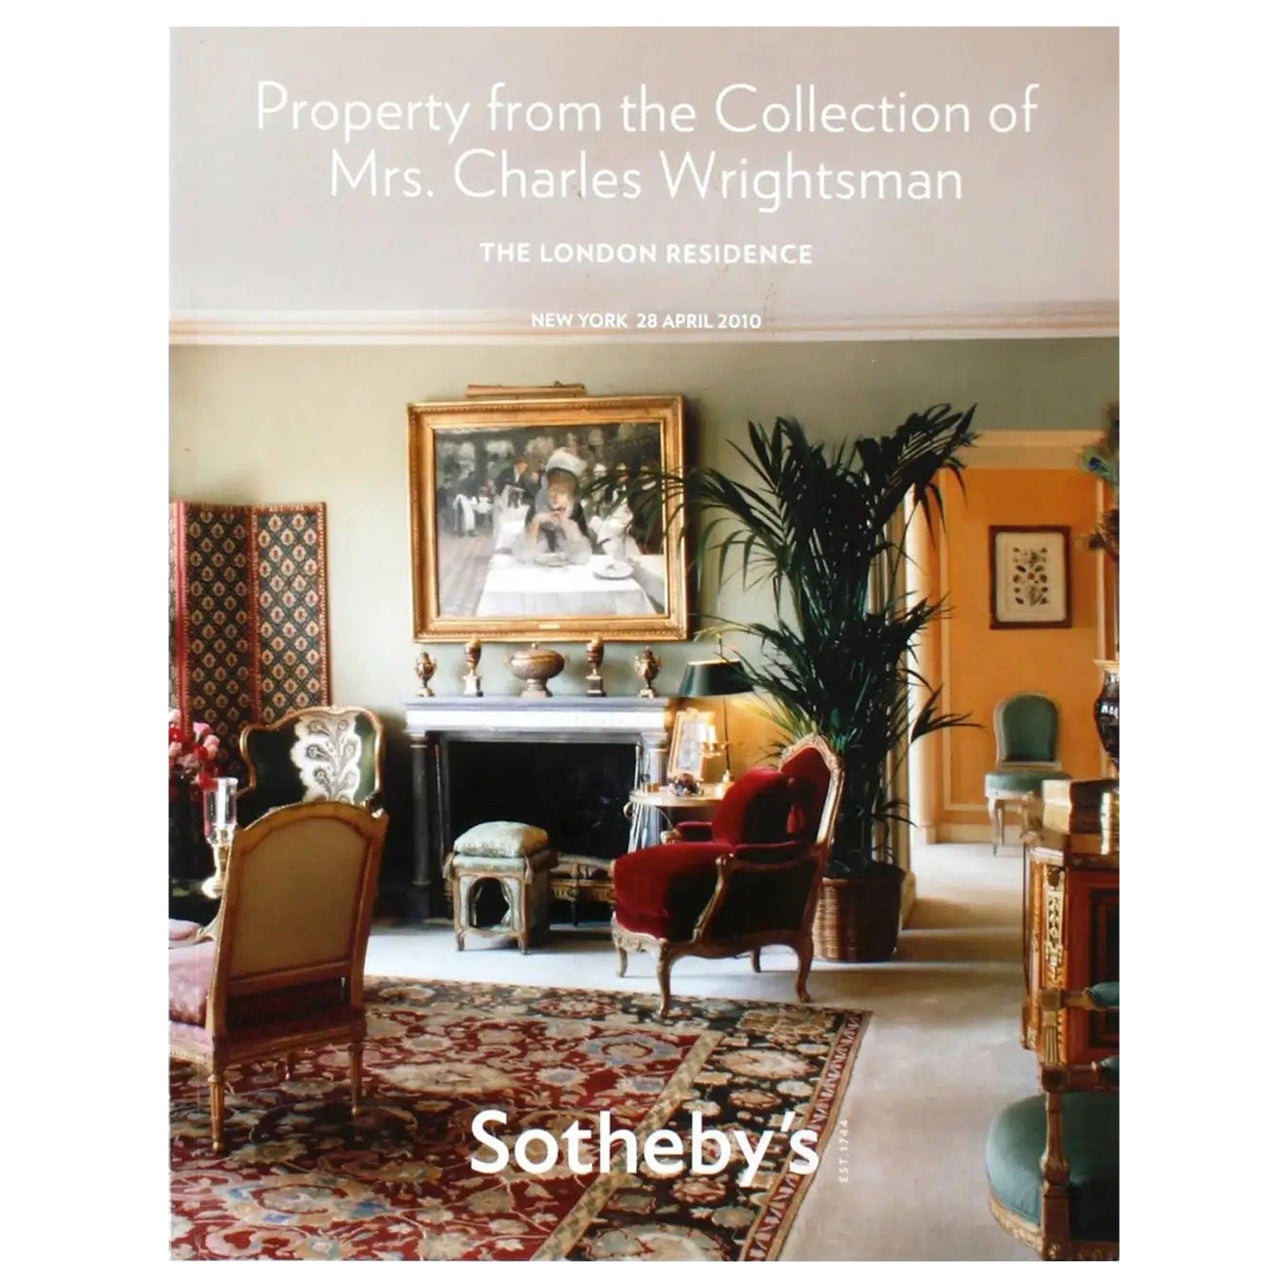 Sotheby's Property from Collection of Mrs. Charles Wrightsman, London Residence